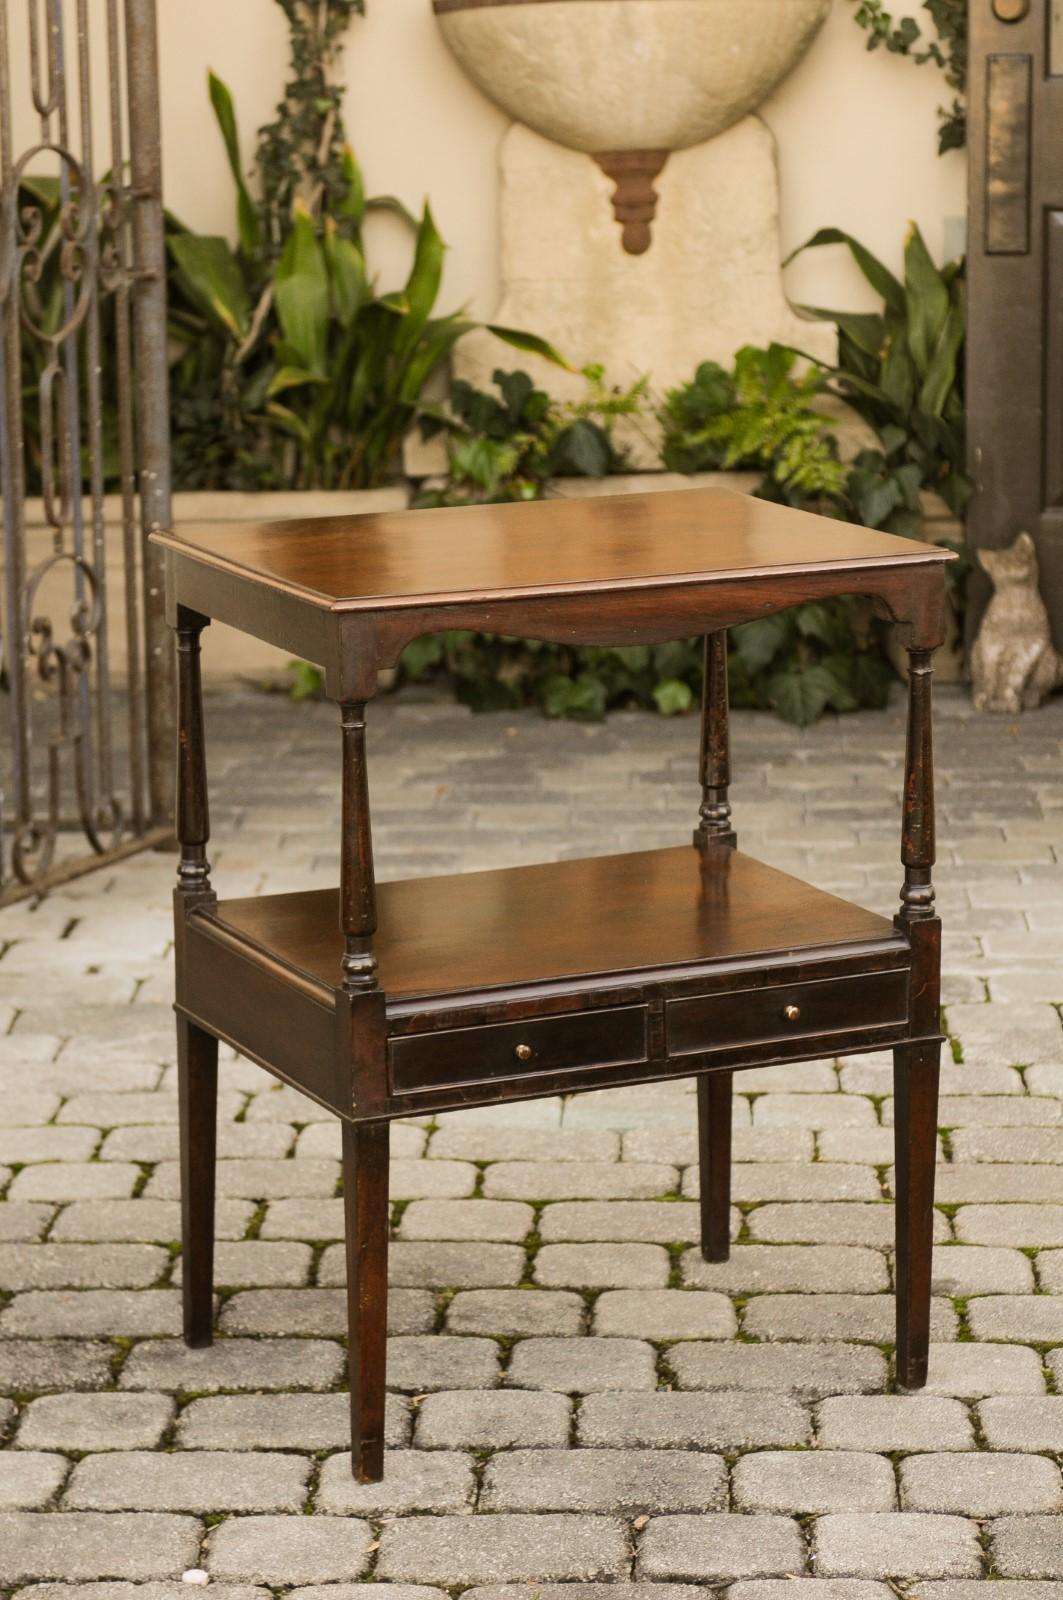 A French mahogany tiered table from the late 19th century with valanced apron, lower shelf and two drawers. Born in France during the later years of the politically dynamic 19th century, this exquisite French tiered table features a rectangular top,